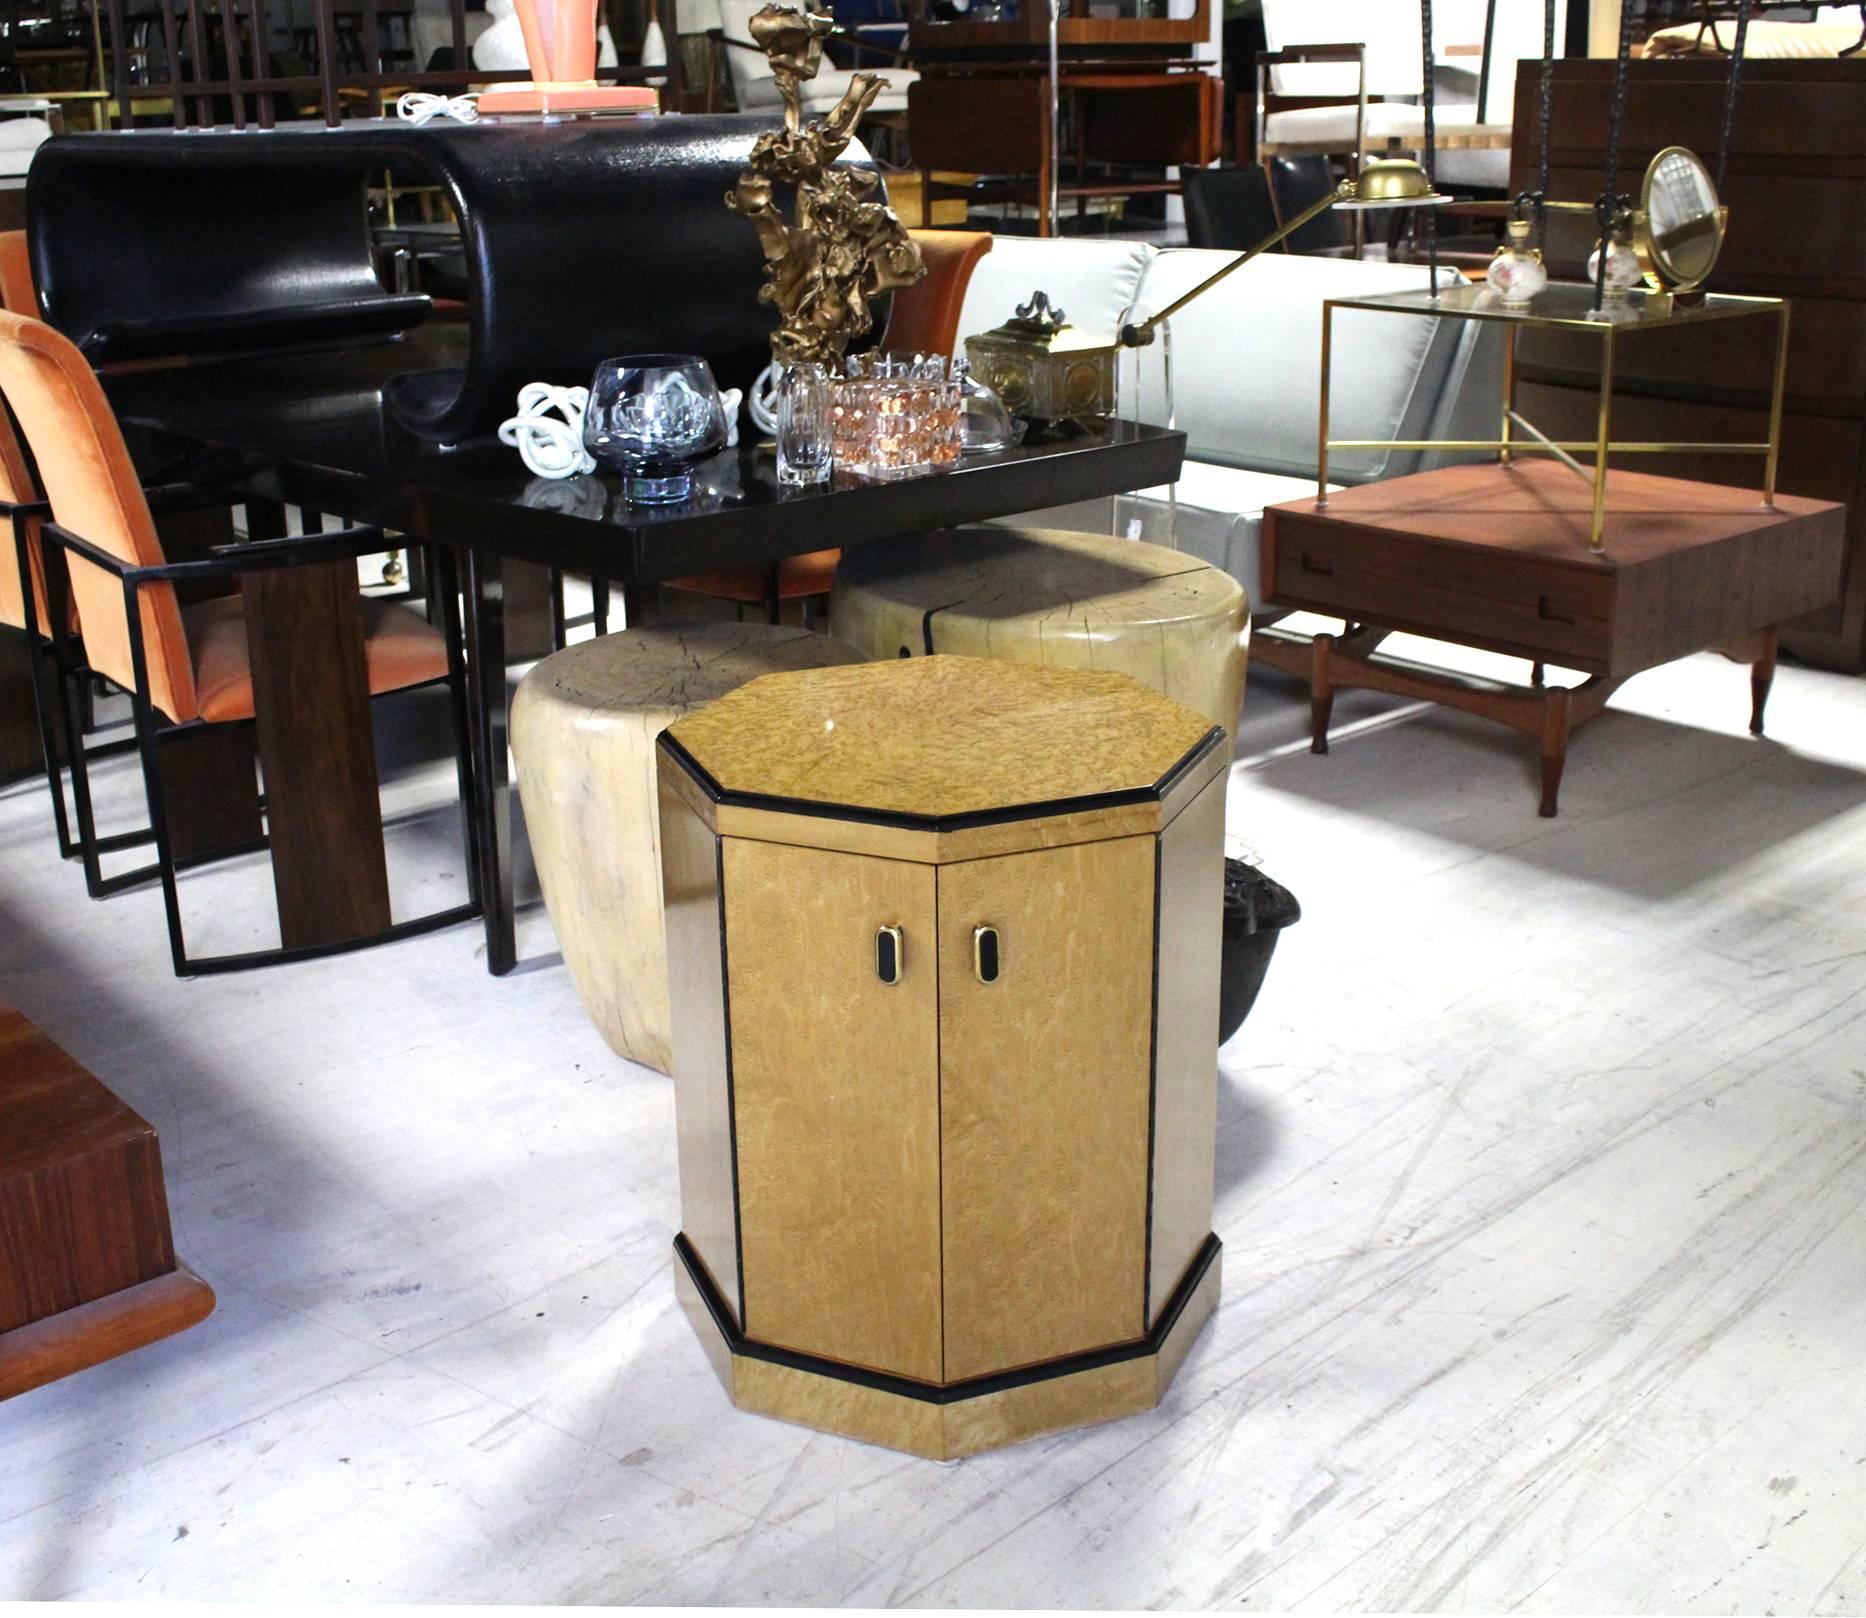 Two doors storage compartment octagon shape side table or pedestal perfect art work display.